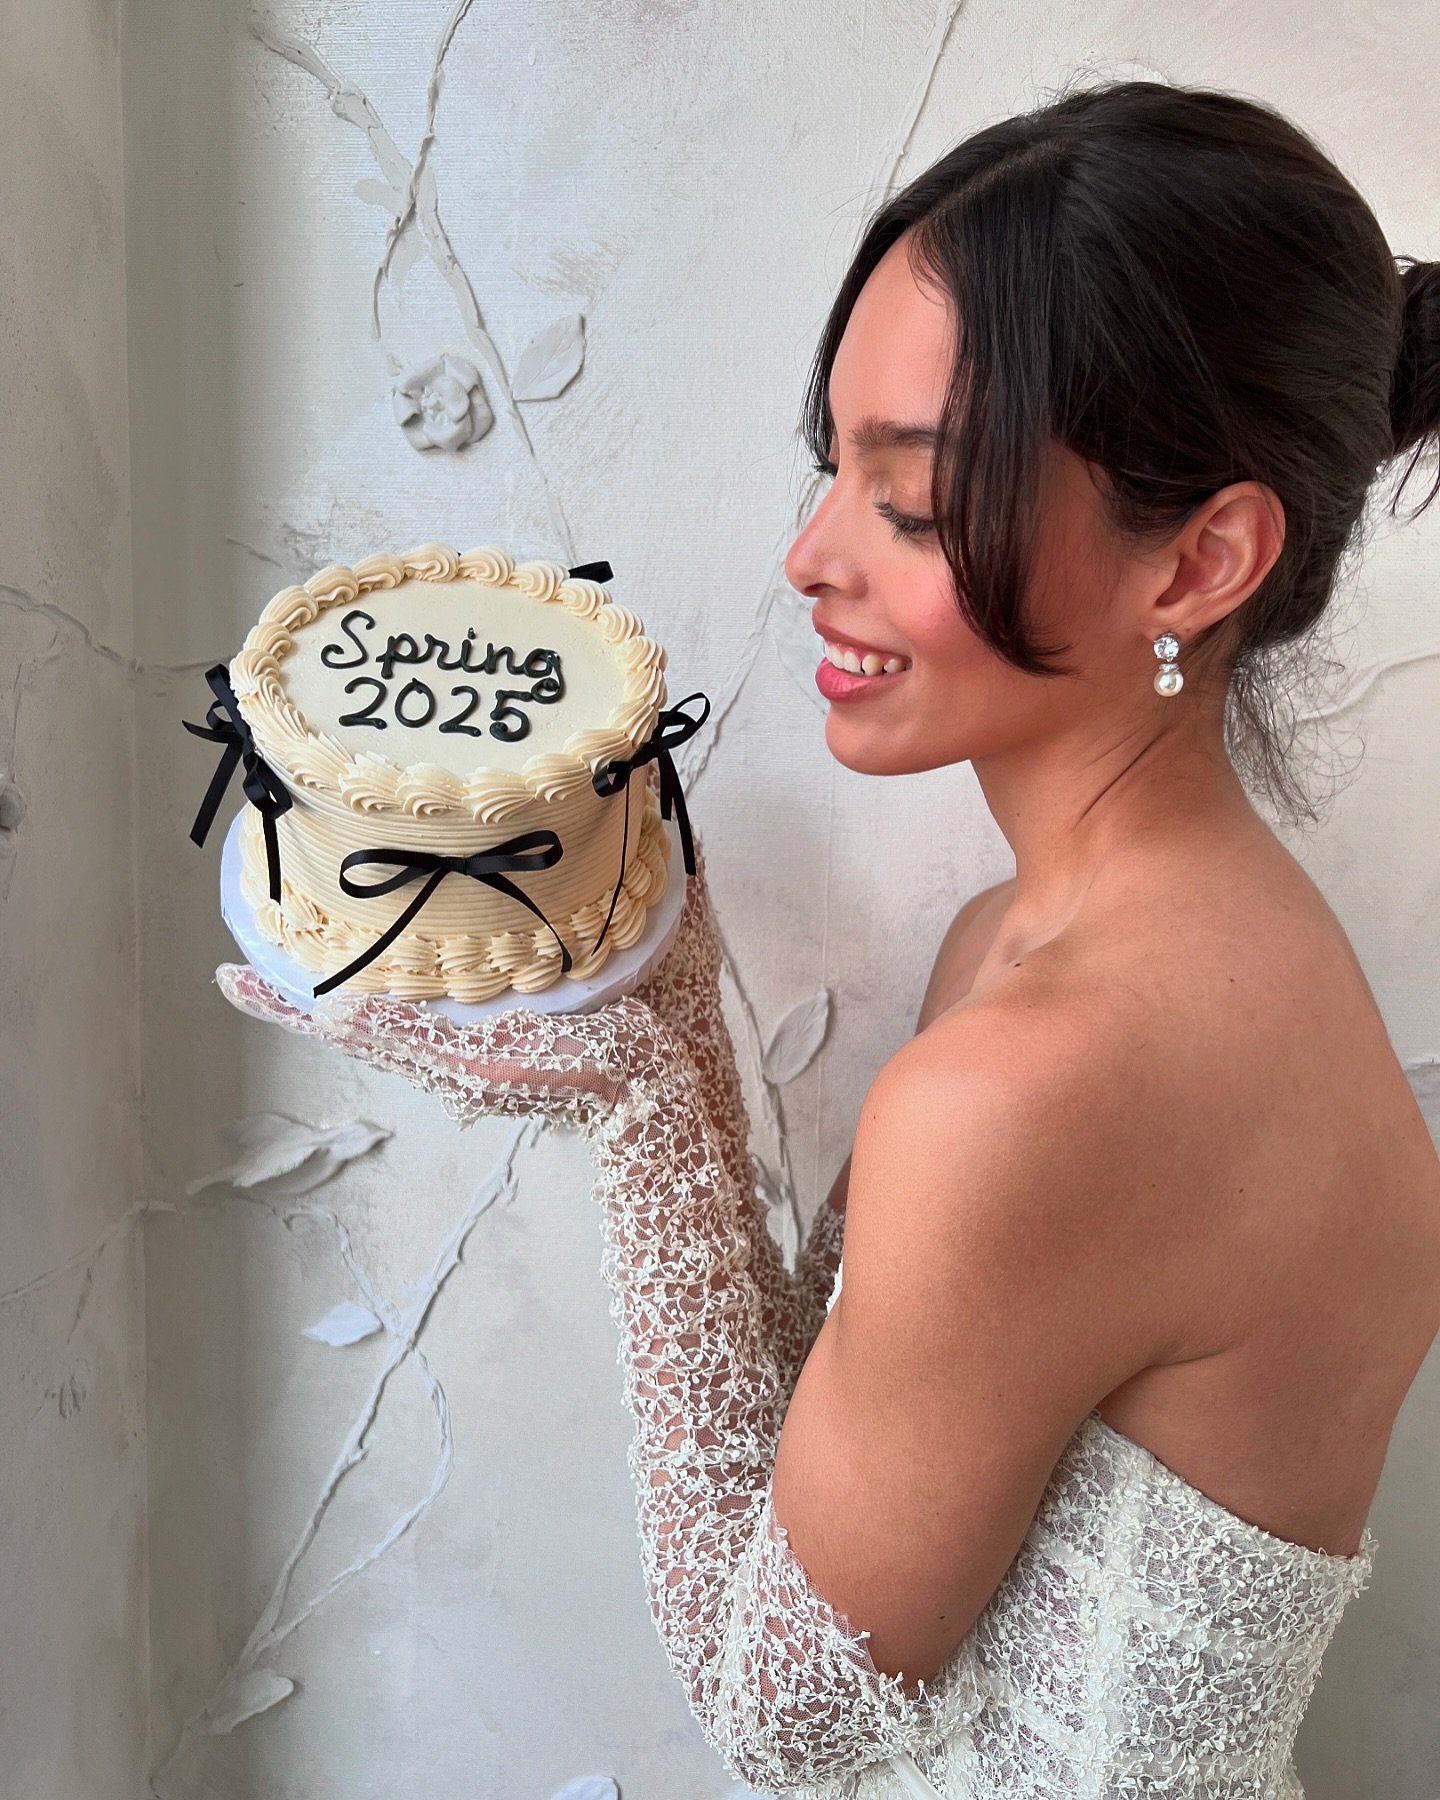 Cheers to our beautiful brides! 🥂💍 As we wrap up our Spring/Summer 2025 collection trunk shows, we are so happy to welcome each of you into our SPINA Bride family. 🫶

Your journey to finding the perfect wedding dress is a part of your unique love 